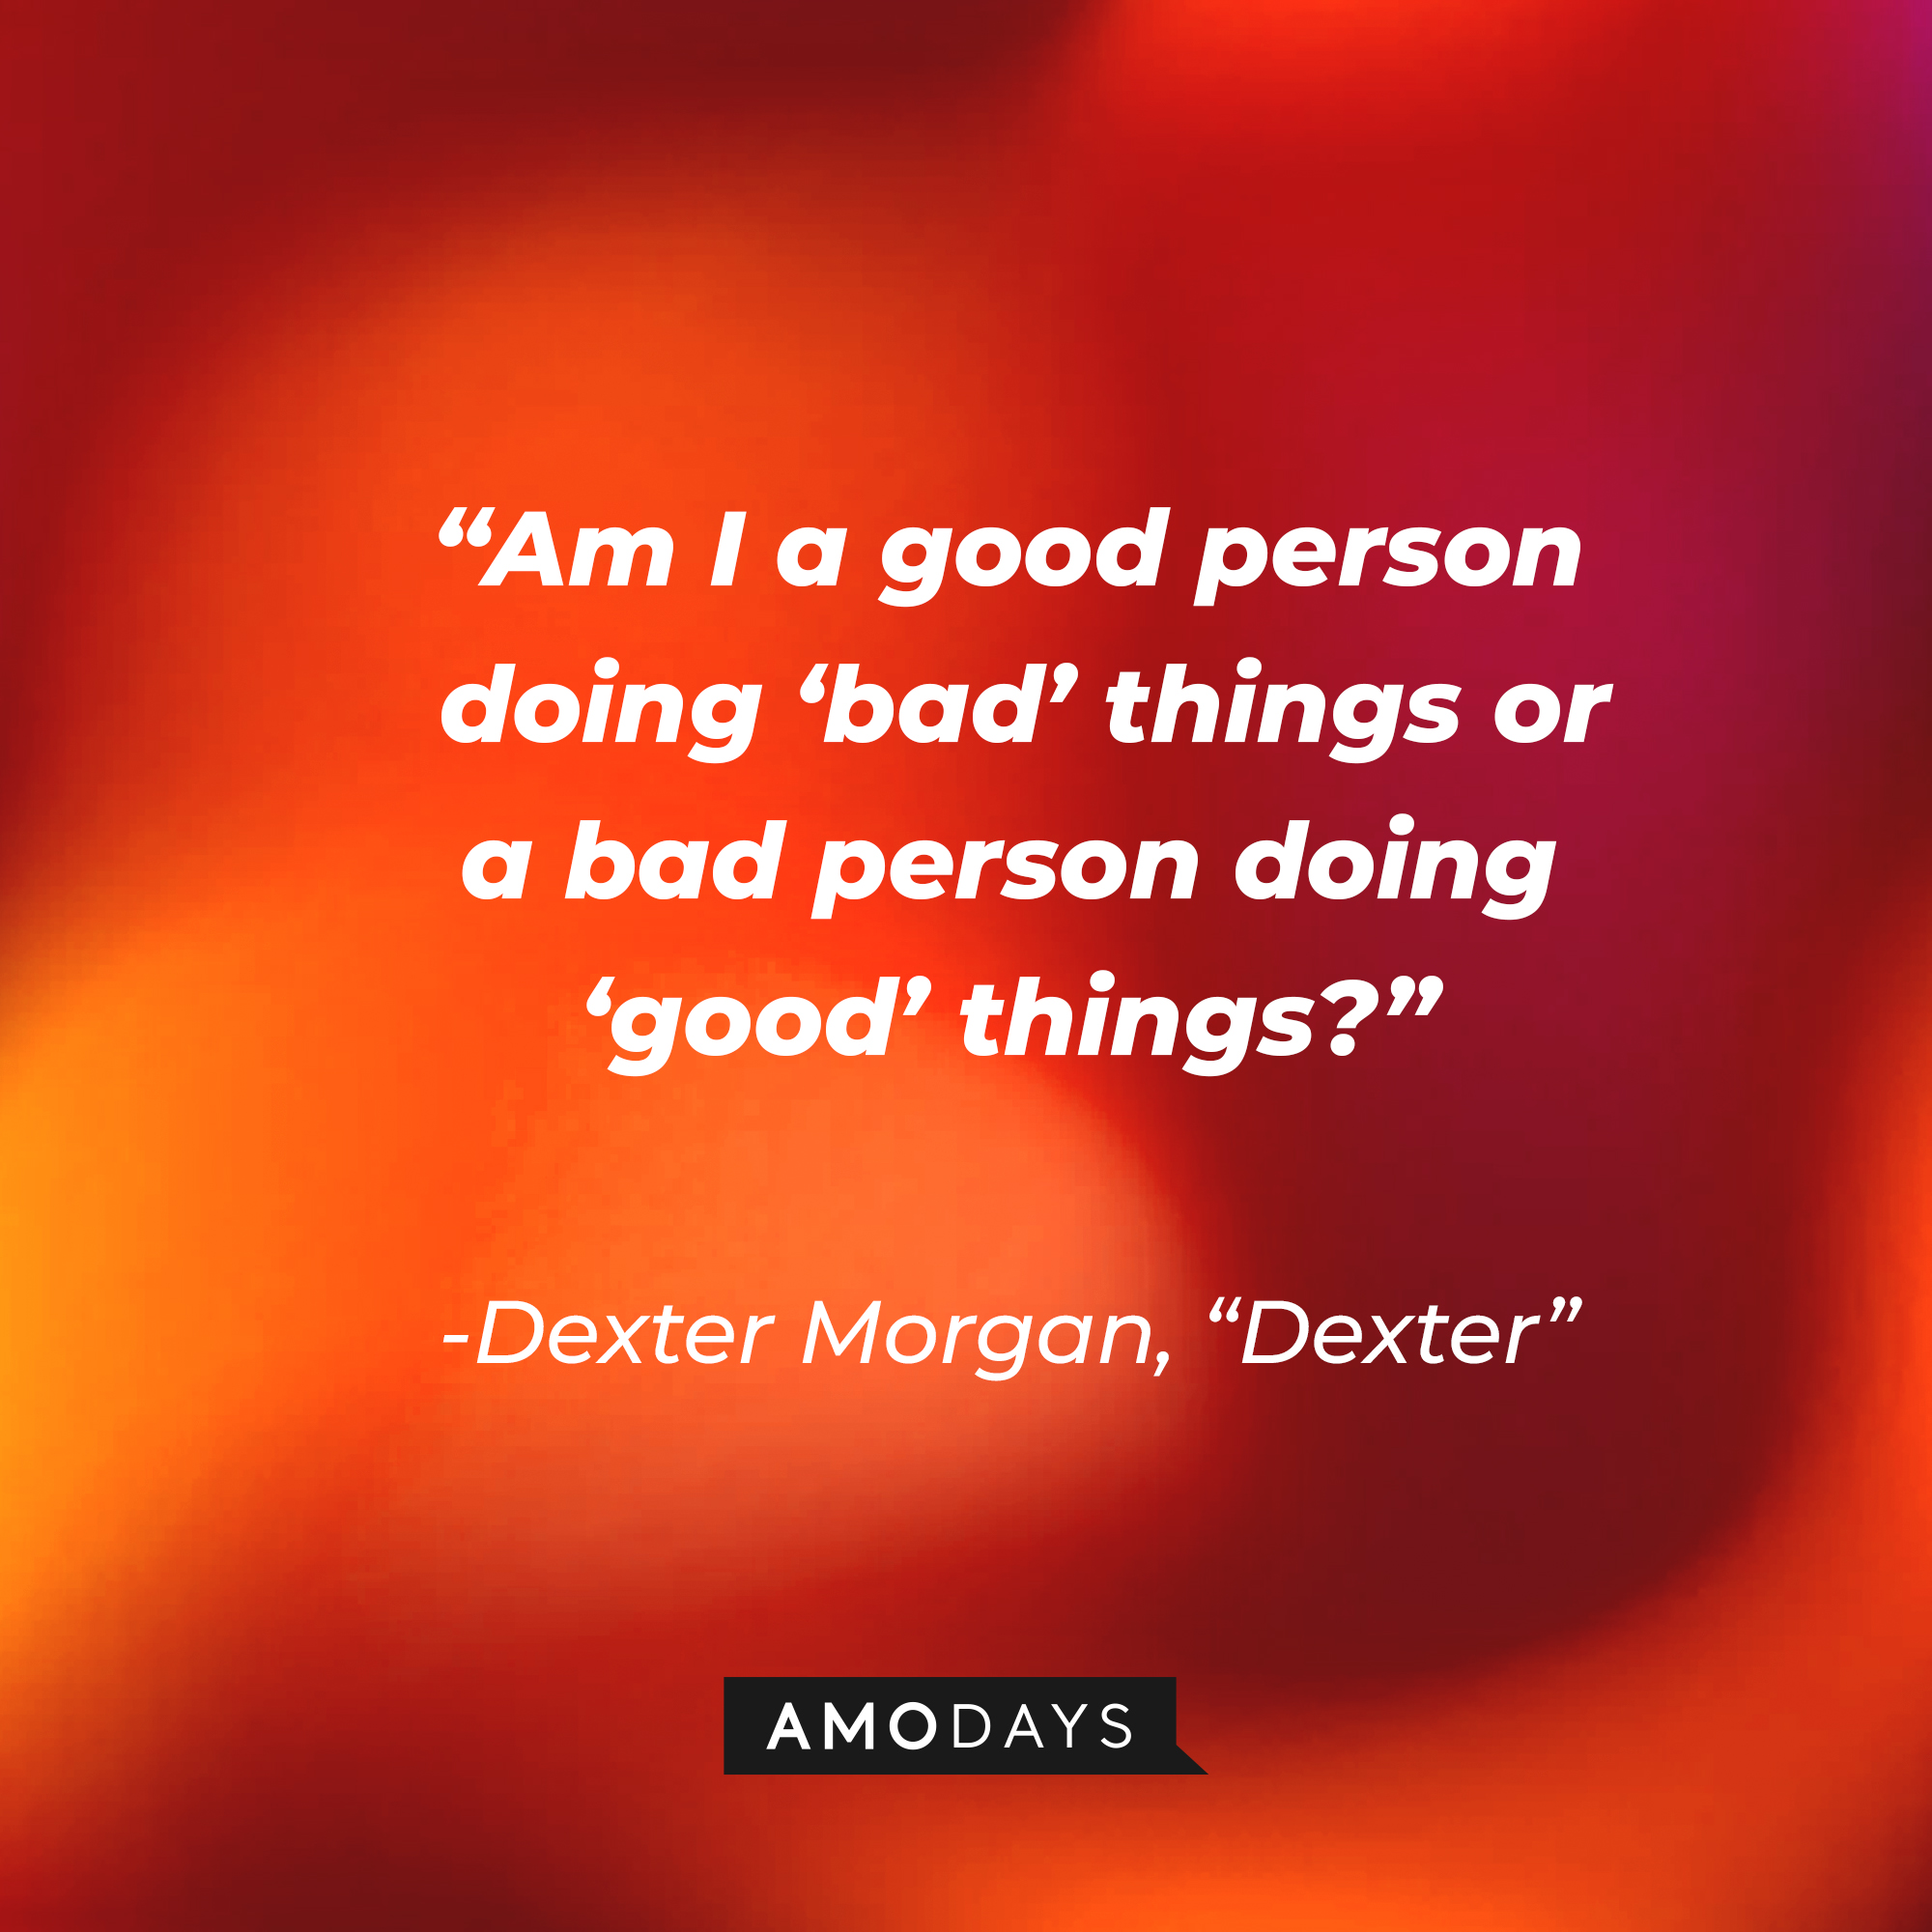 Dexter Morgan's quote from "Dexter:" “Am I a good person doing ‘bad’ things or a bad person doing ‘good’ things?” | Source: AmoDays